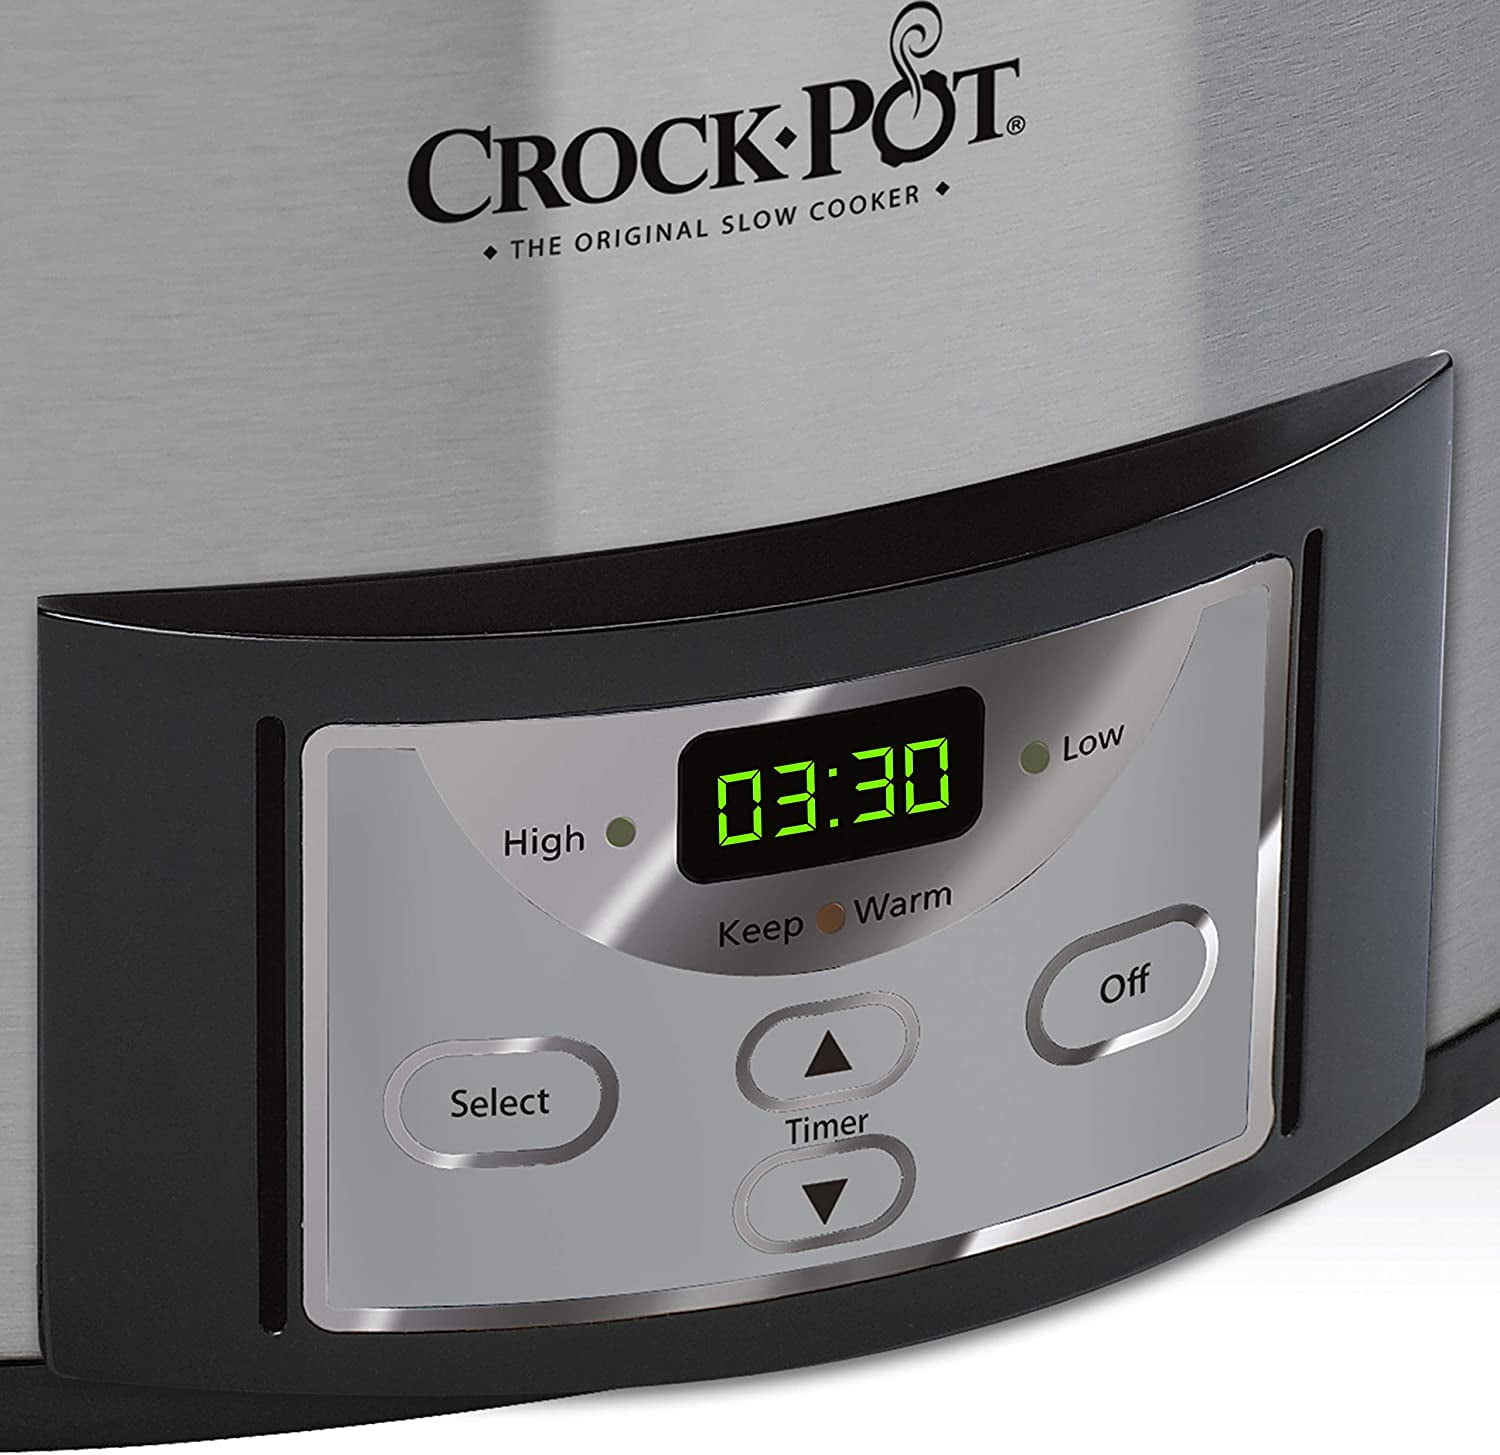 Crock-Pot 3.5 Quart Casserole Manual Slow Cooker, Charcoal & SCCPVL610-SA  6-Quart Cook & Carry Programmable Slow Cooker with Digital Timer, Stainless